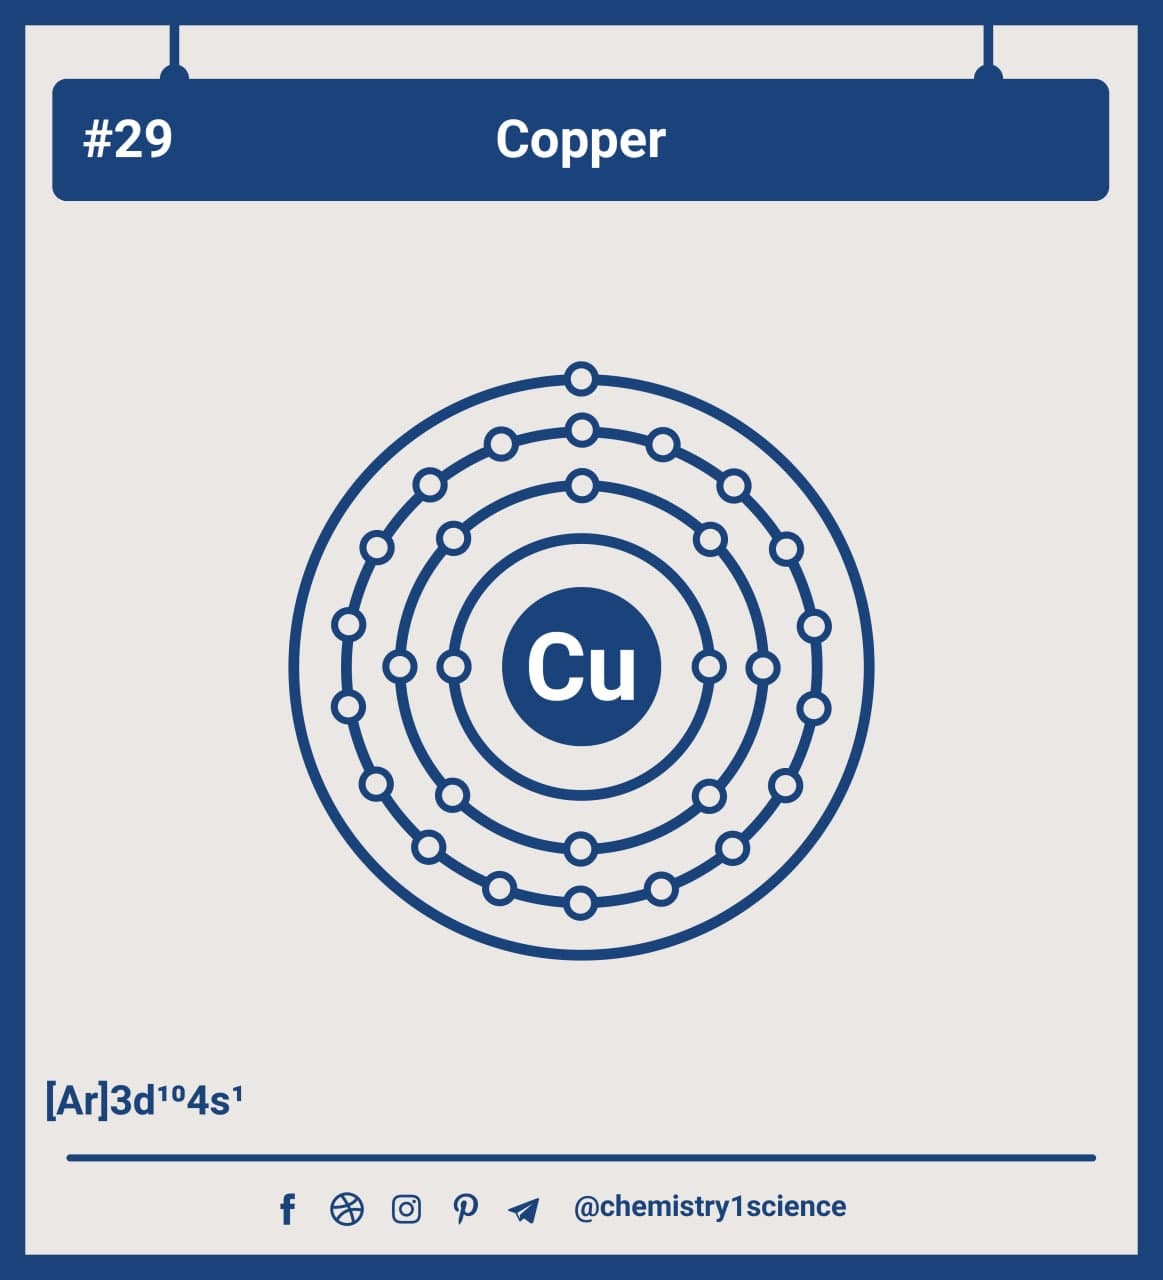 Atom Diagrams Showing Electron Shell Configurations of the Copper